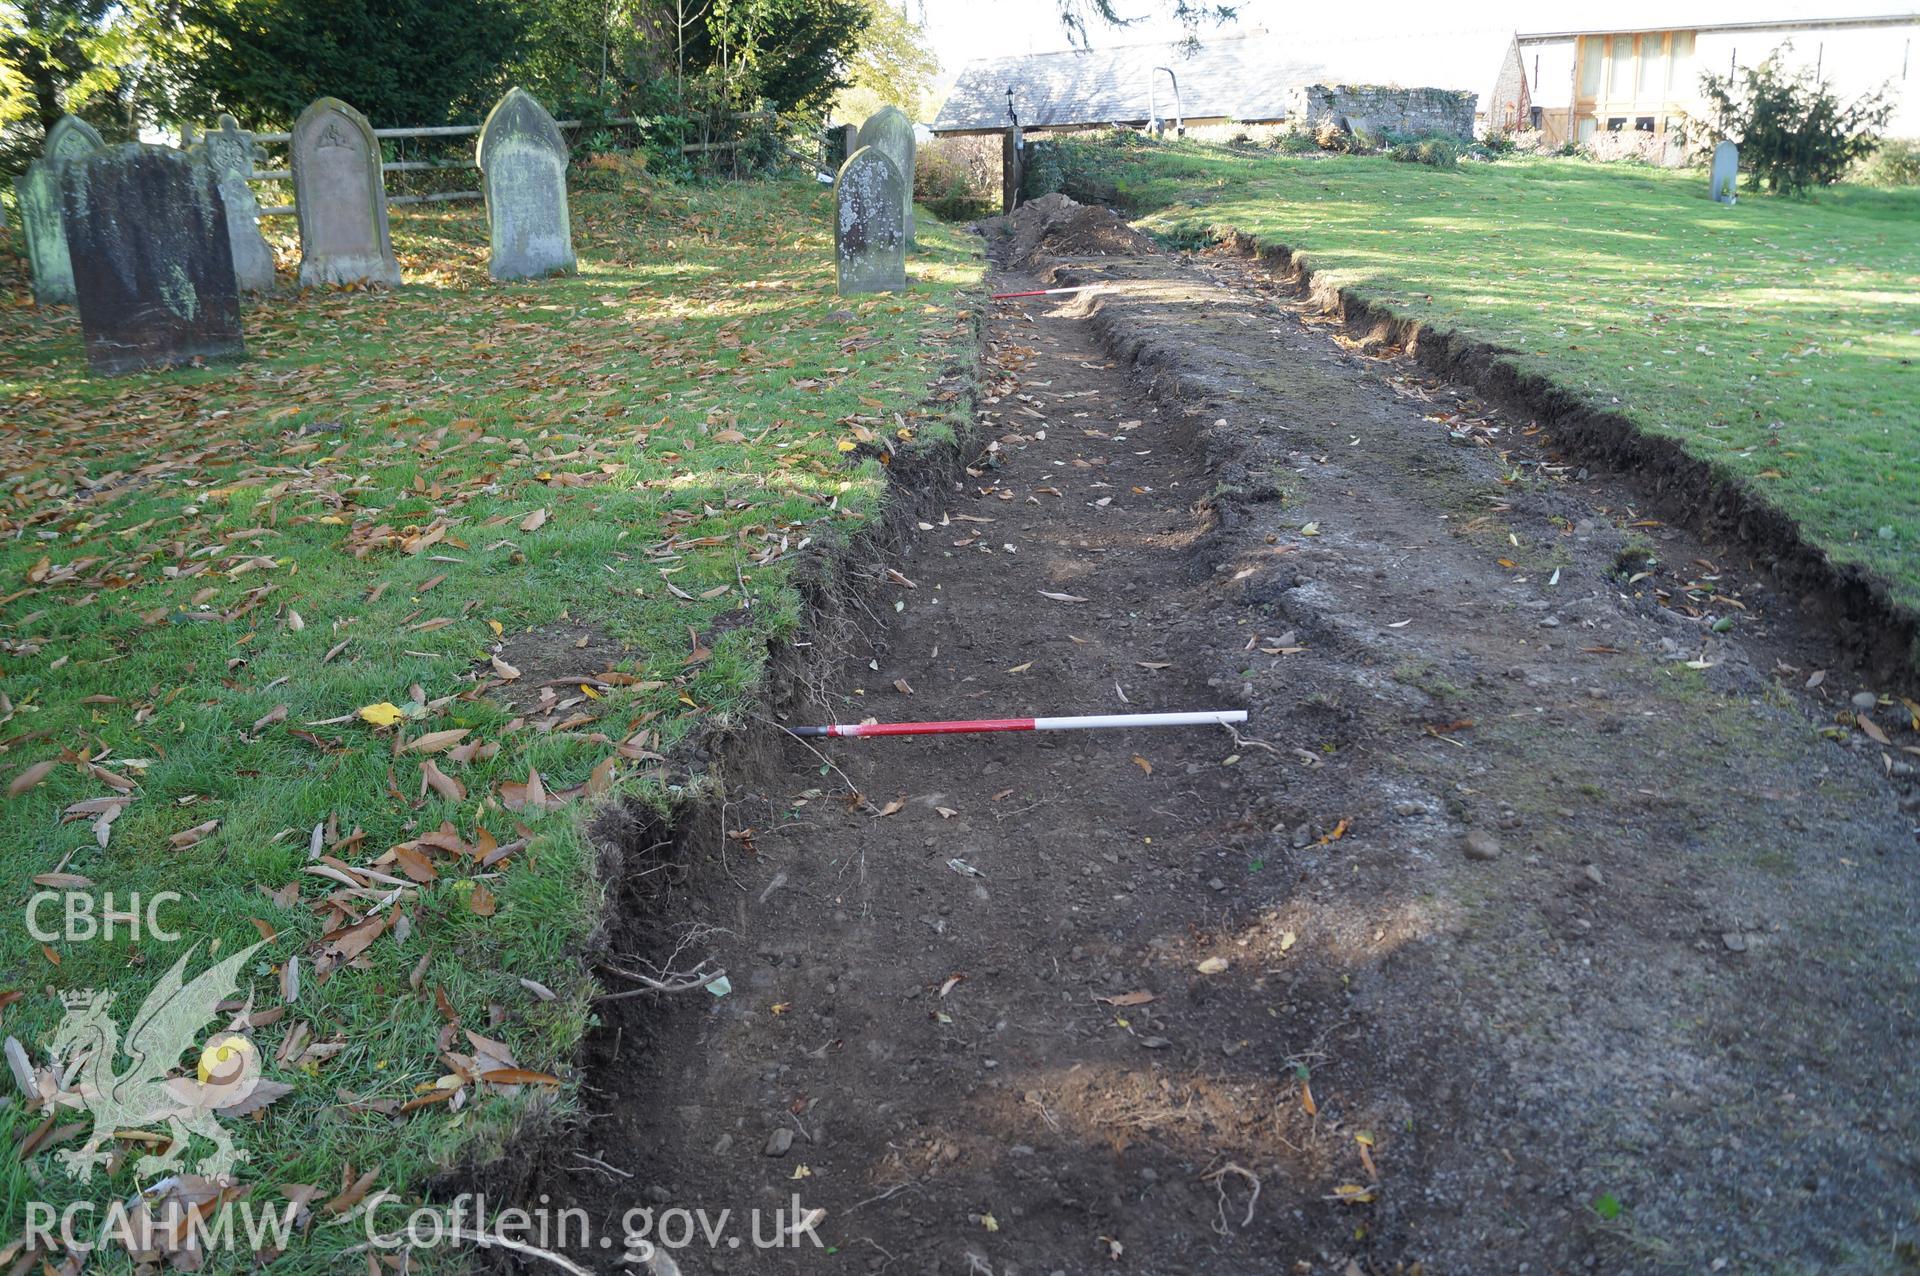 View 'looking west northwest at Trench B after cleaning,' at St. Mary's, Gladestry, Powys. Photograph & description by Jenny Hall and Paul Sambrook of Trysor, 16th October 2017.